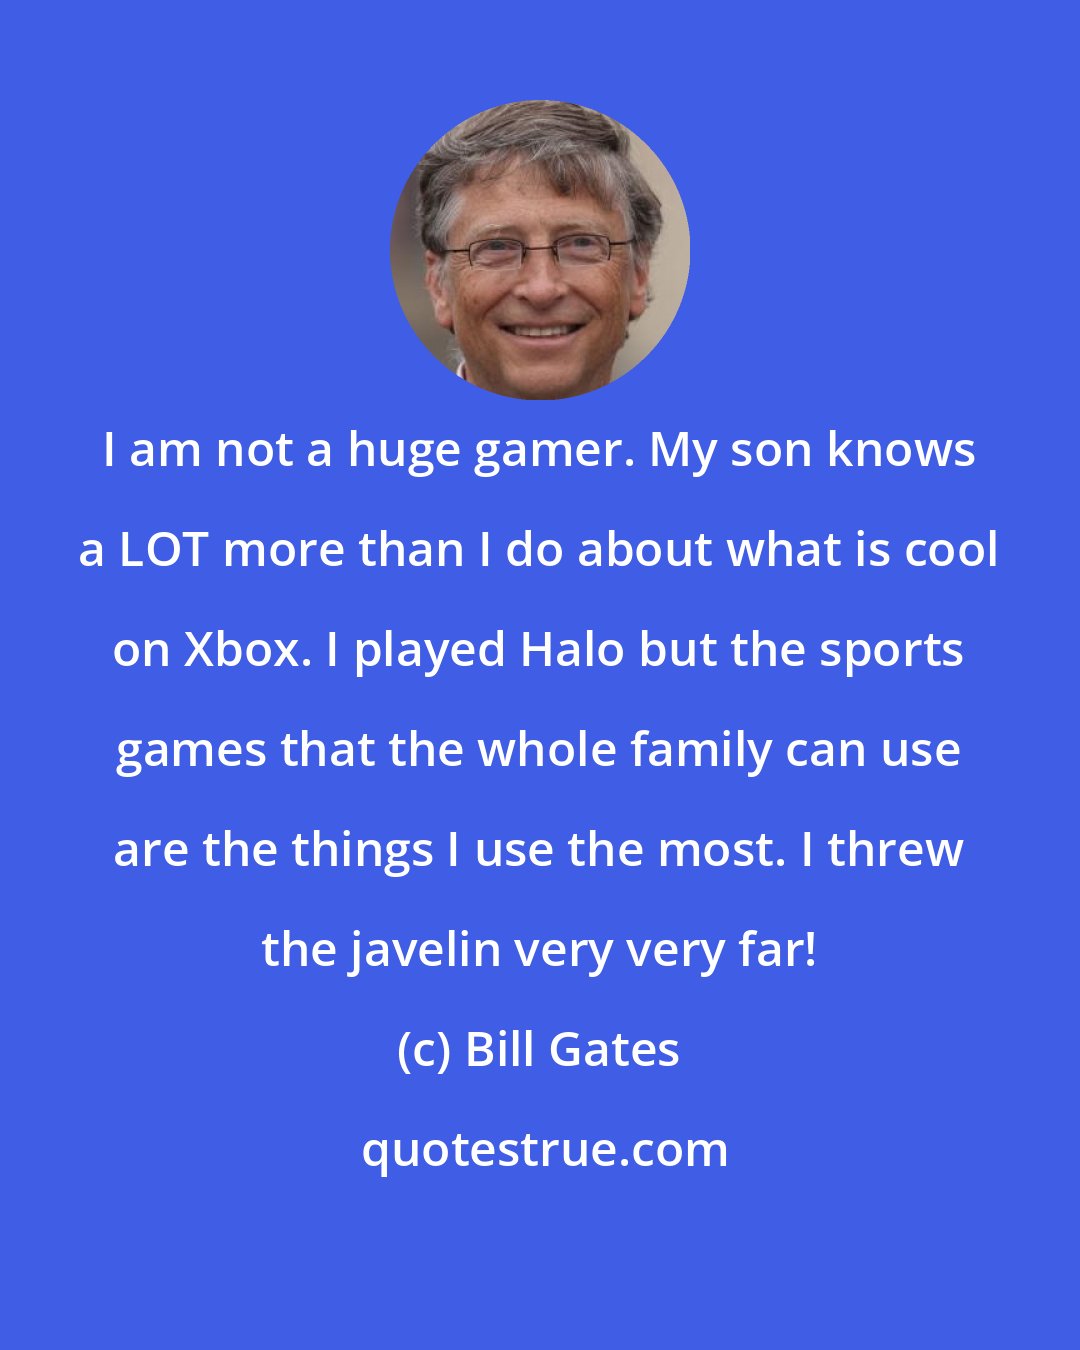 Bill Gates: I am not a huge gamer. My son knows a LOT more than I do about what is cool on Xbox. I played Halo but the sports games that the whole family can use are the things I use the most. I threw the javelin very very far!